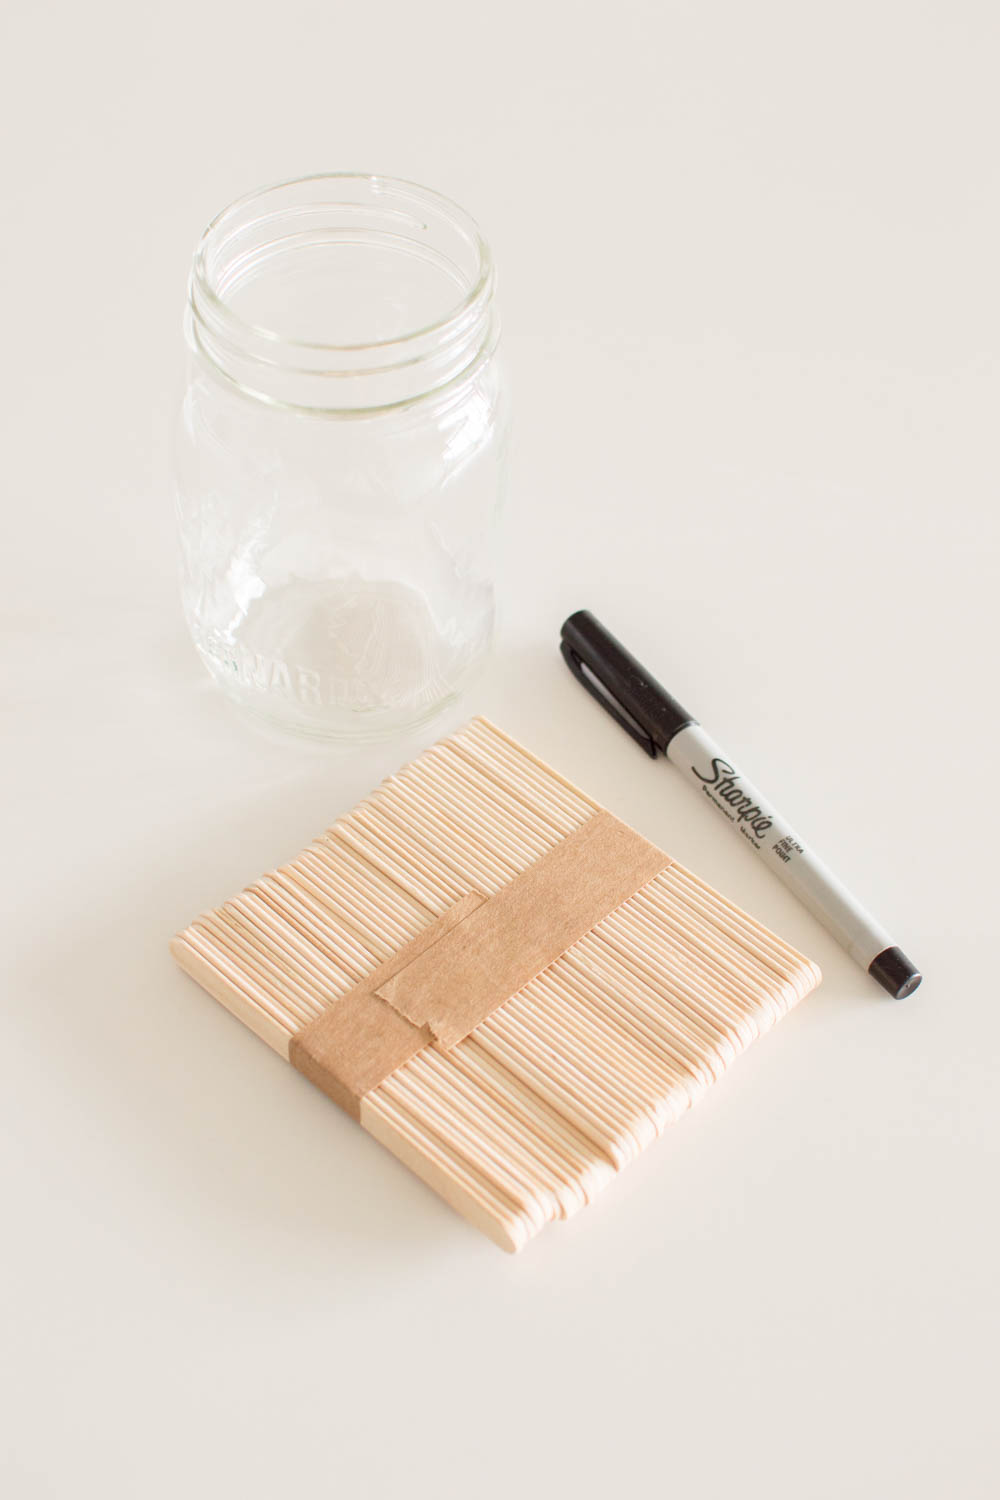 Supplies required to make a date night jar including popsicle sticks, permanent marker and a mason jar